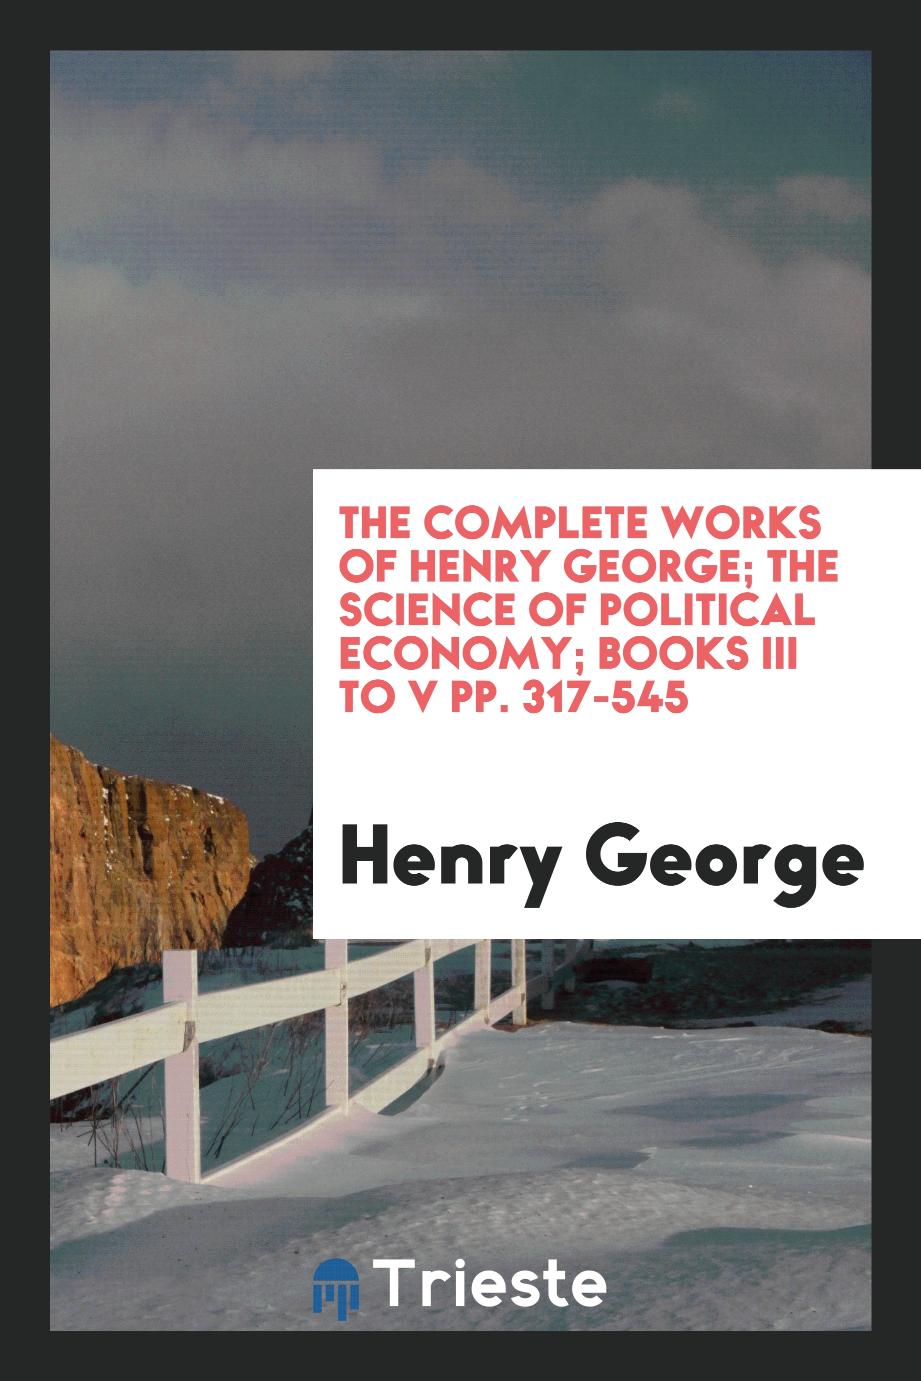 The complete works of Henry George; The Science of Political Economy; Books III to V pp. 317-545